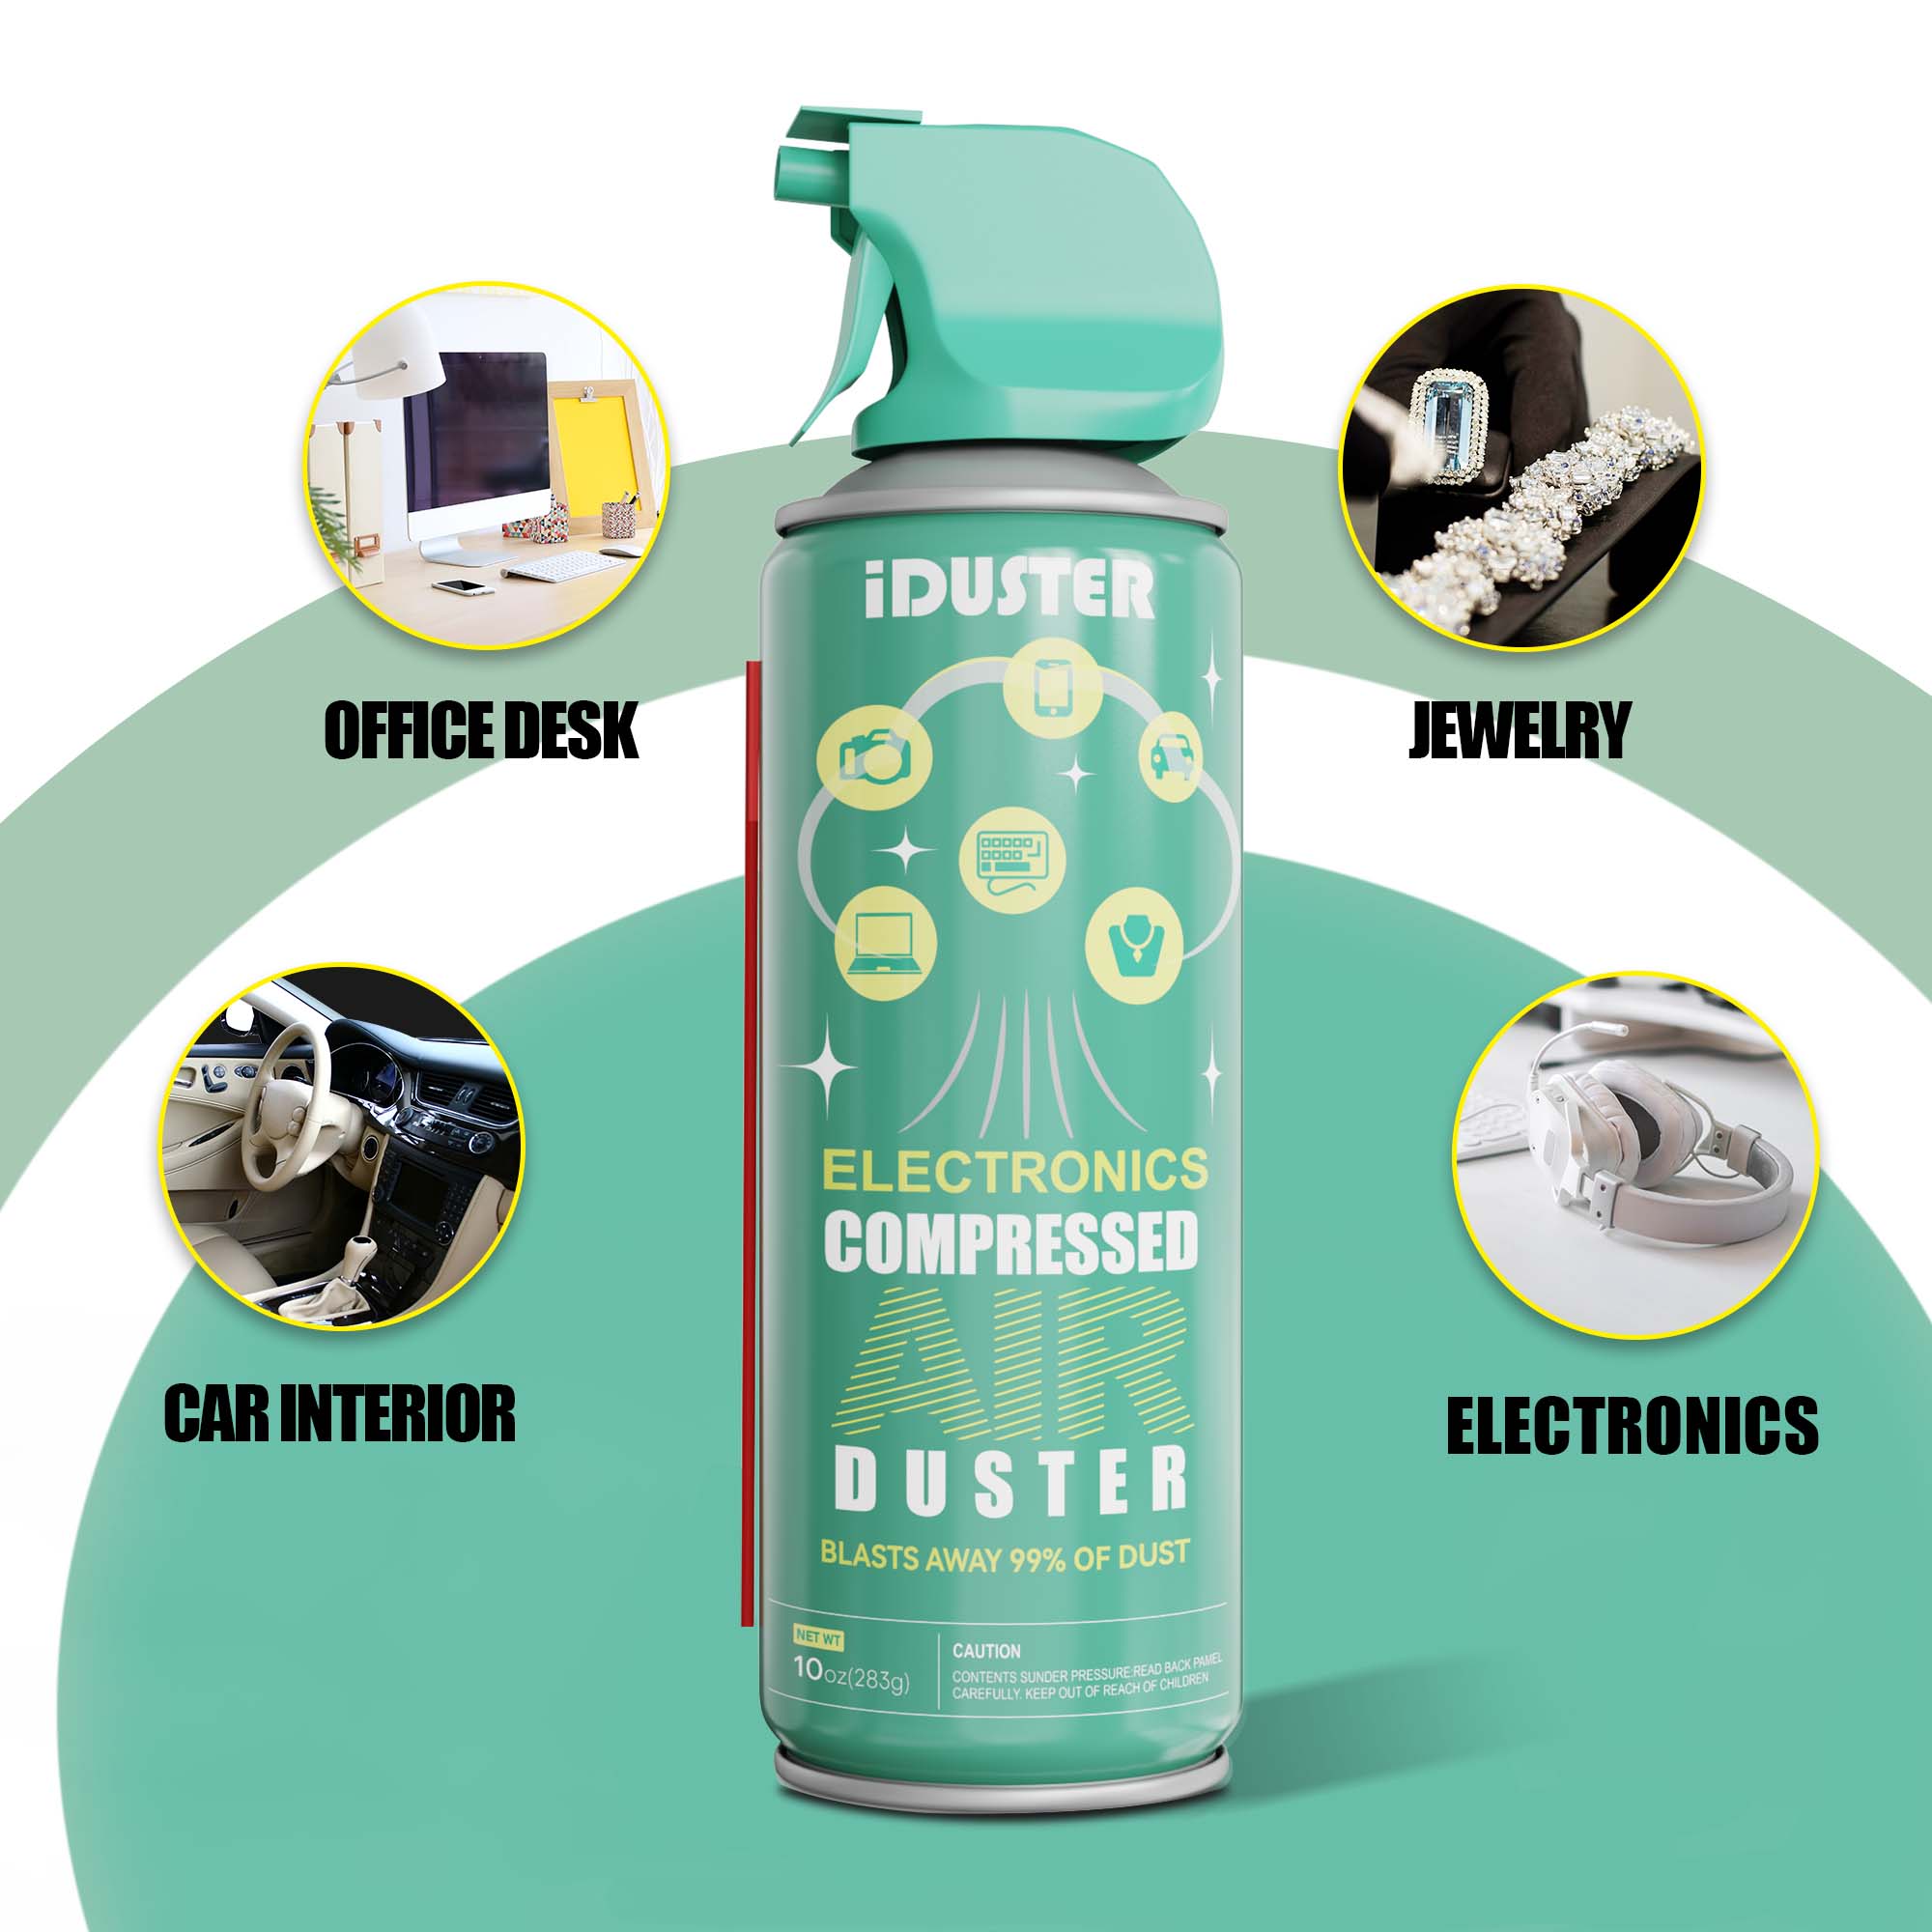 iDuster Compressed Air Duster, Electronics Gas Air Duster Can ,10 oz, 4 Packs - image 5 of 6